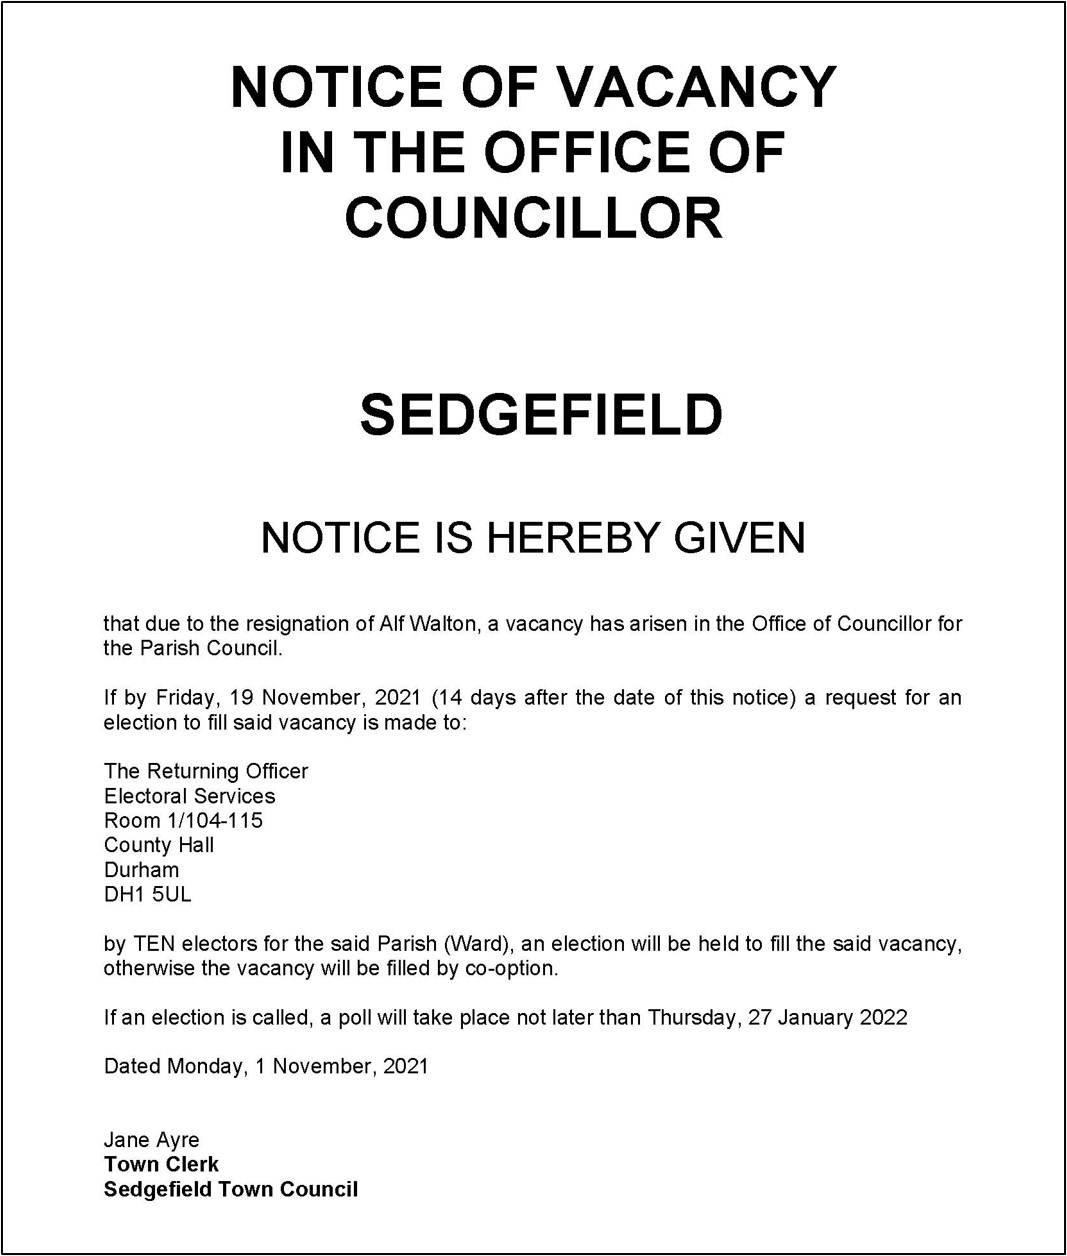 Notice of Vacancy - Sedgefield Town Council dated 1 November 2021